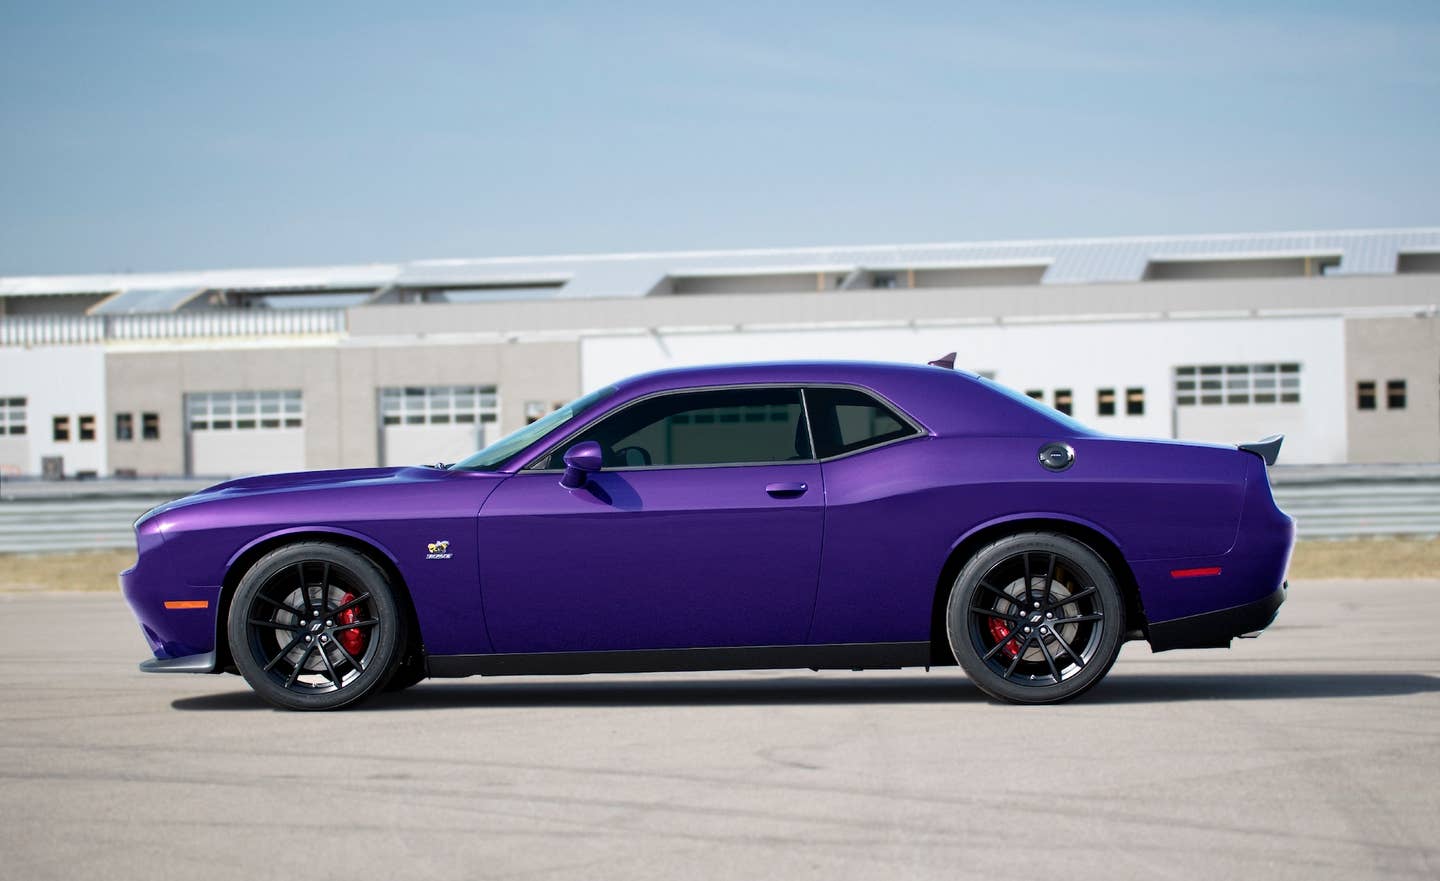 The 2023 Dodge Challenger and Dodge Charger lineup will pay homage to the muscle car pair with seven special models, the return of a rainbow of heritage colors (including Plum Crazy, shown here on the 2023 Dodge Challenger R/T Scat Pack 1320), an expansion of SRT Jailbreak models, a commemorative “Last Call” underhood plaque for all 2023 Charger and Challenger vehicles and a new, customer-focused vehicle allocation process.